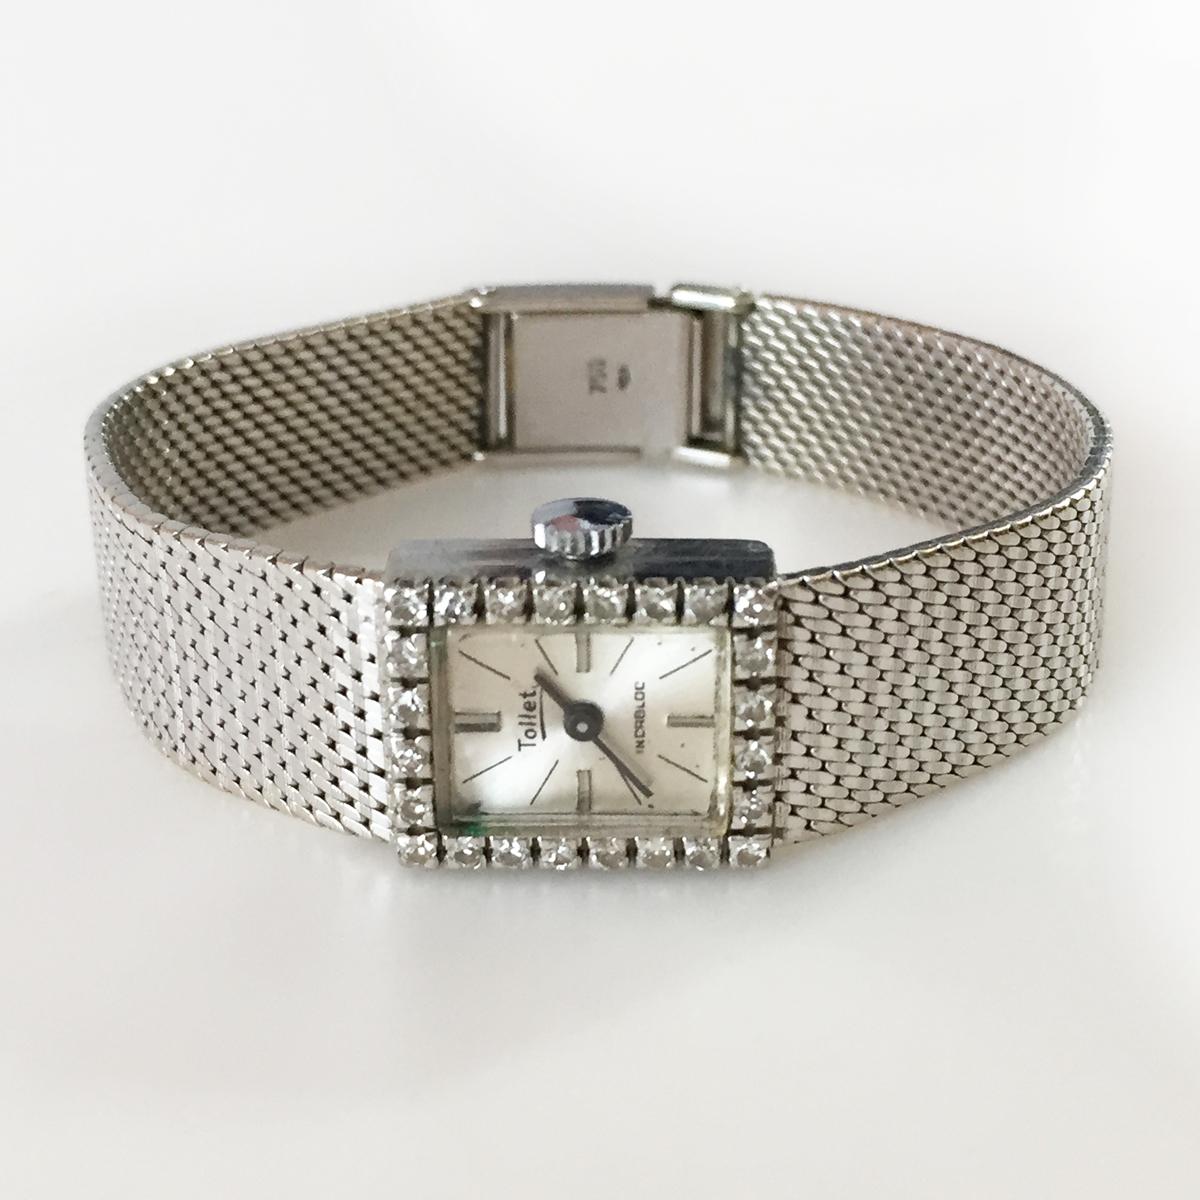 TOLLET: Vintage 18k white gold diamond bezel TOLLET Incablock Swiss made ladies winding movement watch with mesh bracelet. Weight 35.3 grams. Hallmarked 750 (equal to 18k gold). 24 diamonds on rectangular bezel total weight approx. 0.50 ct. Near